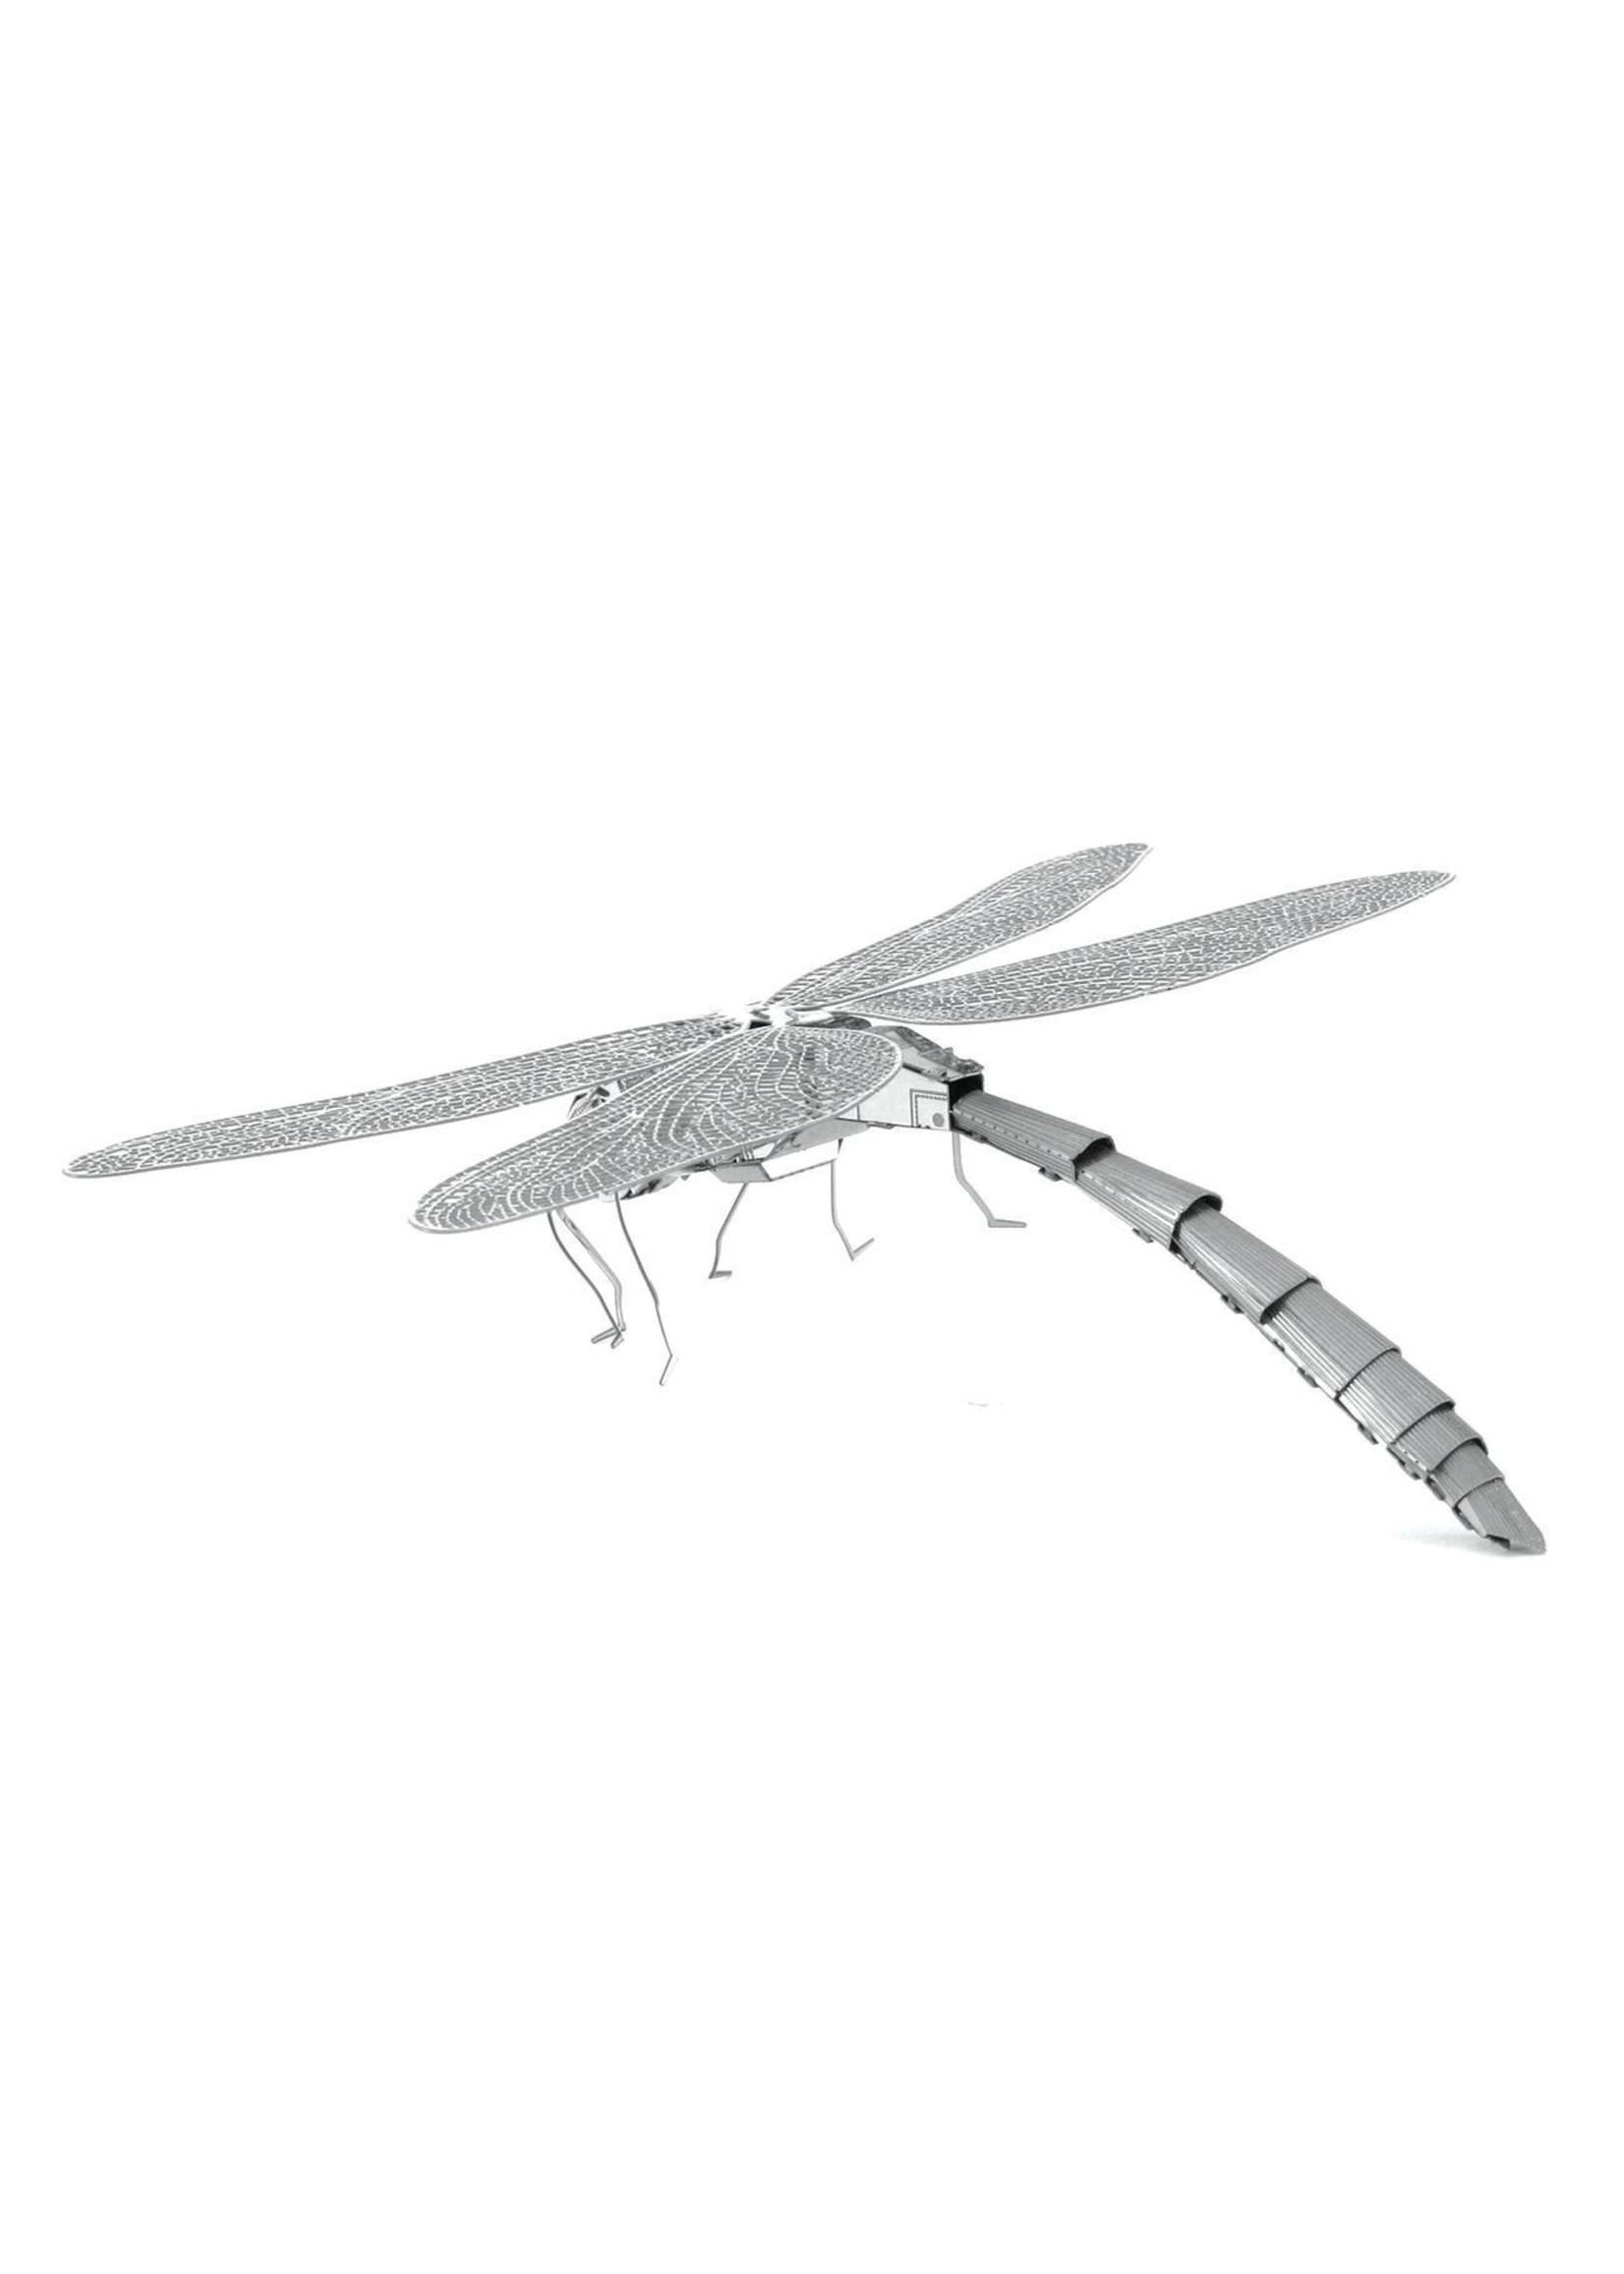 Fascinations Metal Earth - Dragonfly